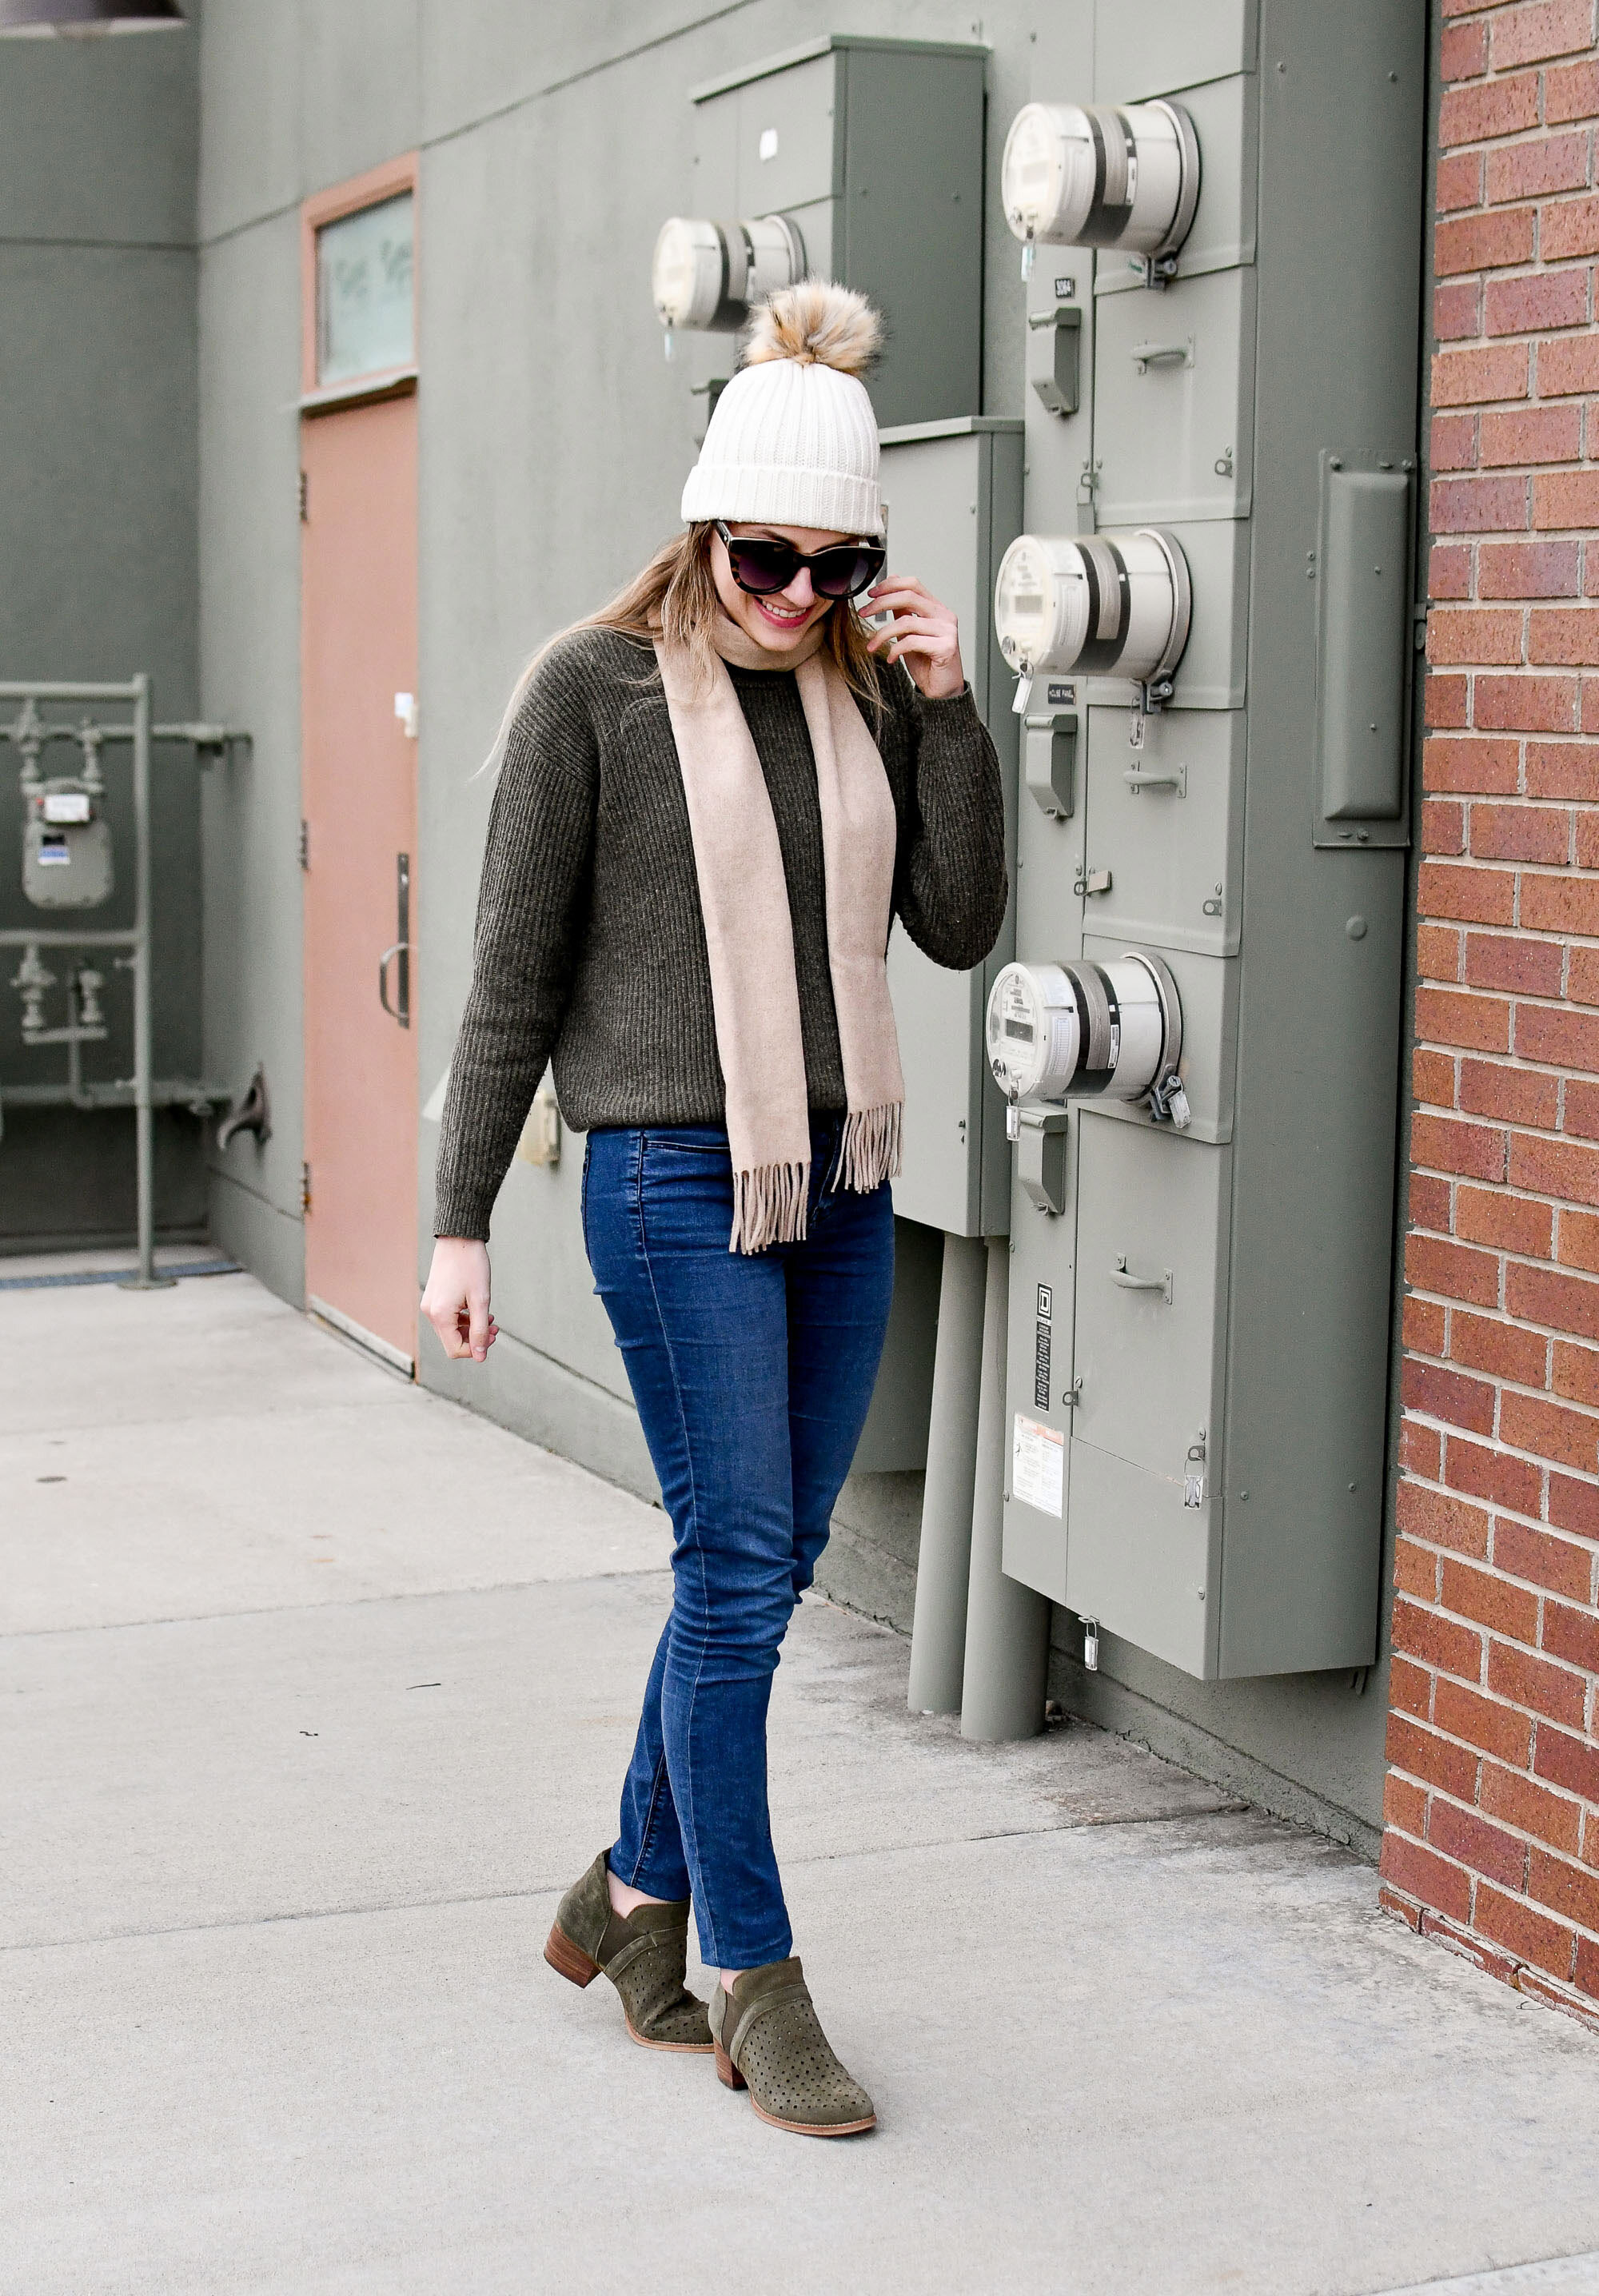 Favorite outfit: Wintergreen — Cotton Cashmere Cat Hair